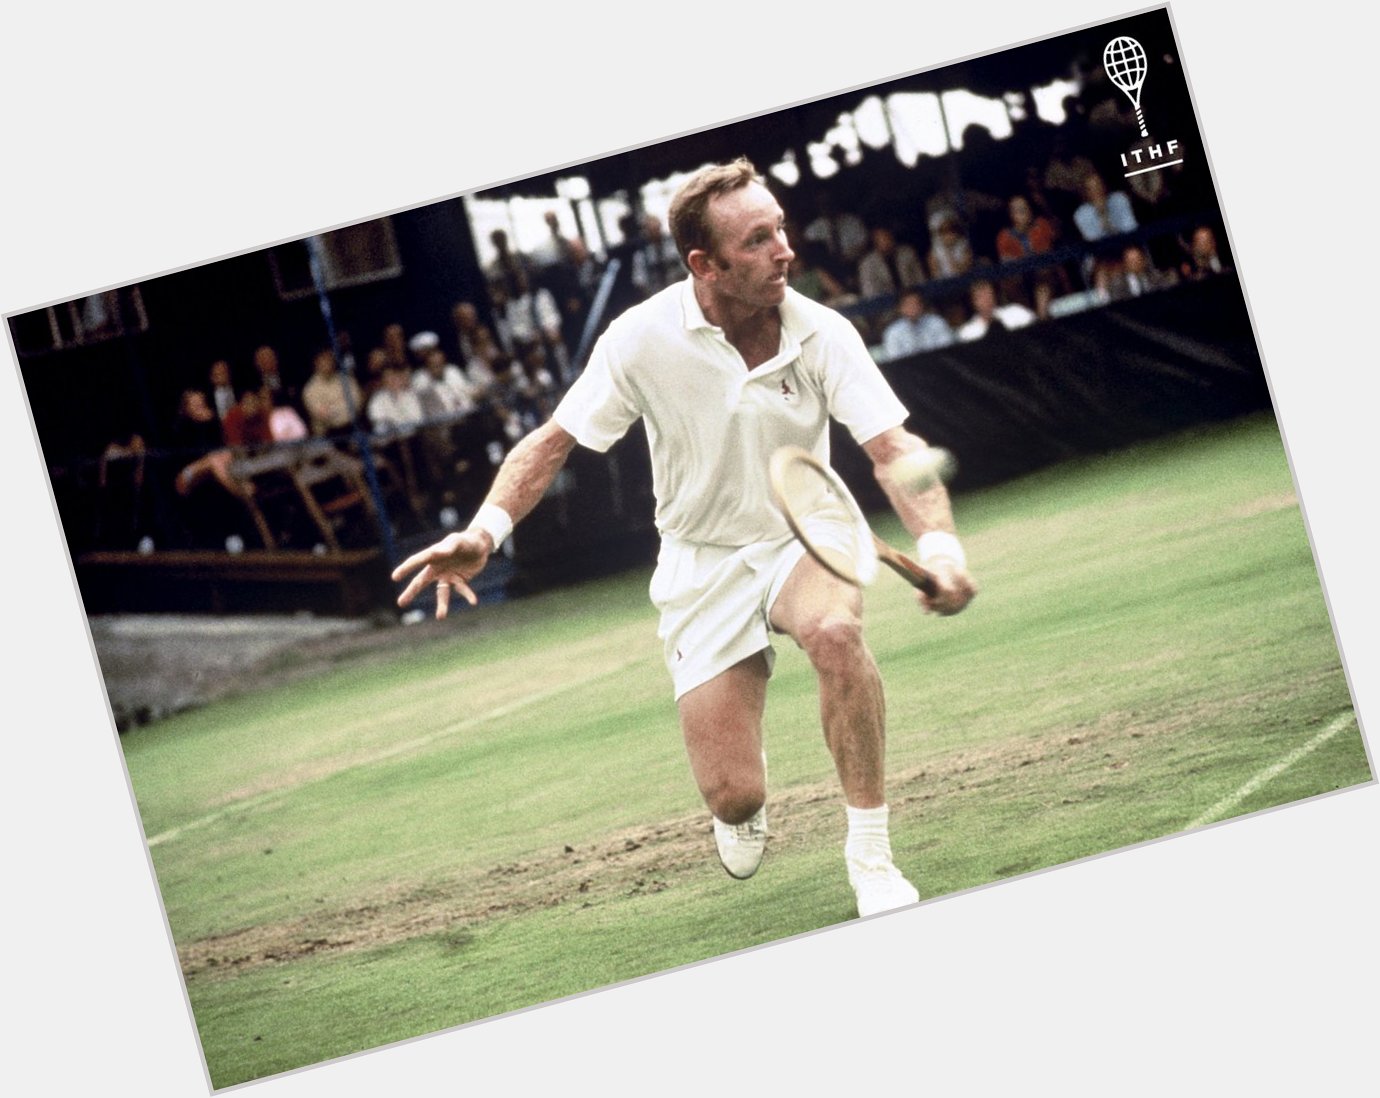 Happy Birthday to an incomparable champion, Hall of Famer Rod Laver. 